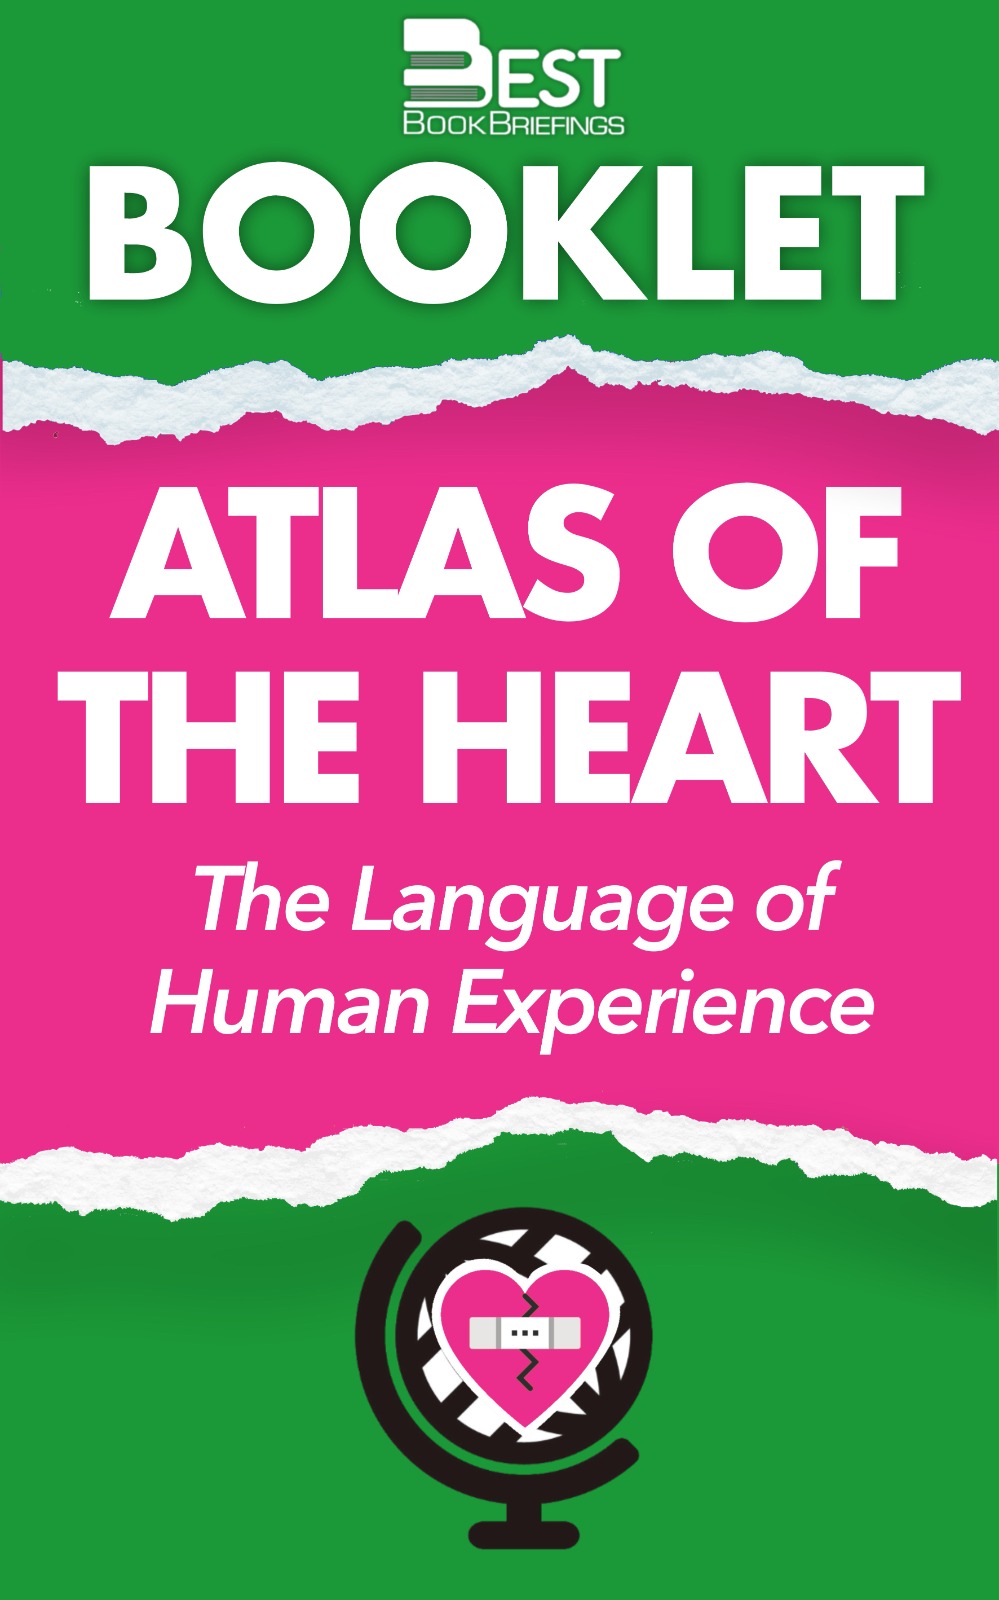 In Atlas of the Heart, Brown takes us on a journey through eighty-seven of the emotions and experiences that define what it means to be human. As she maps the necessary skills and an actionable framework for meaningful connection, she gives us the language and tools to access a universe of new 